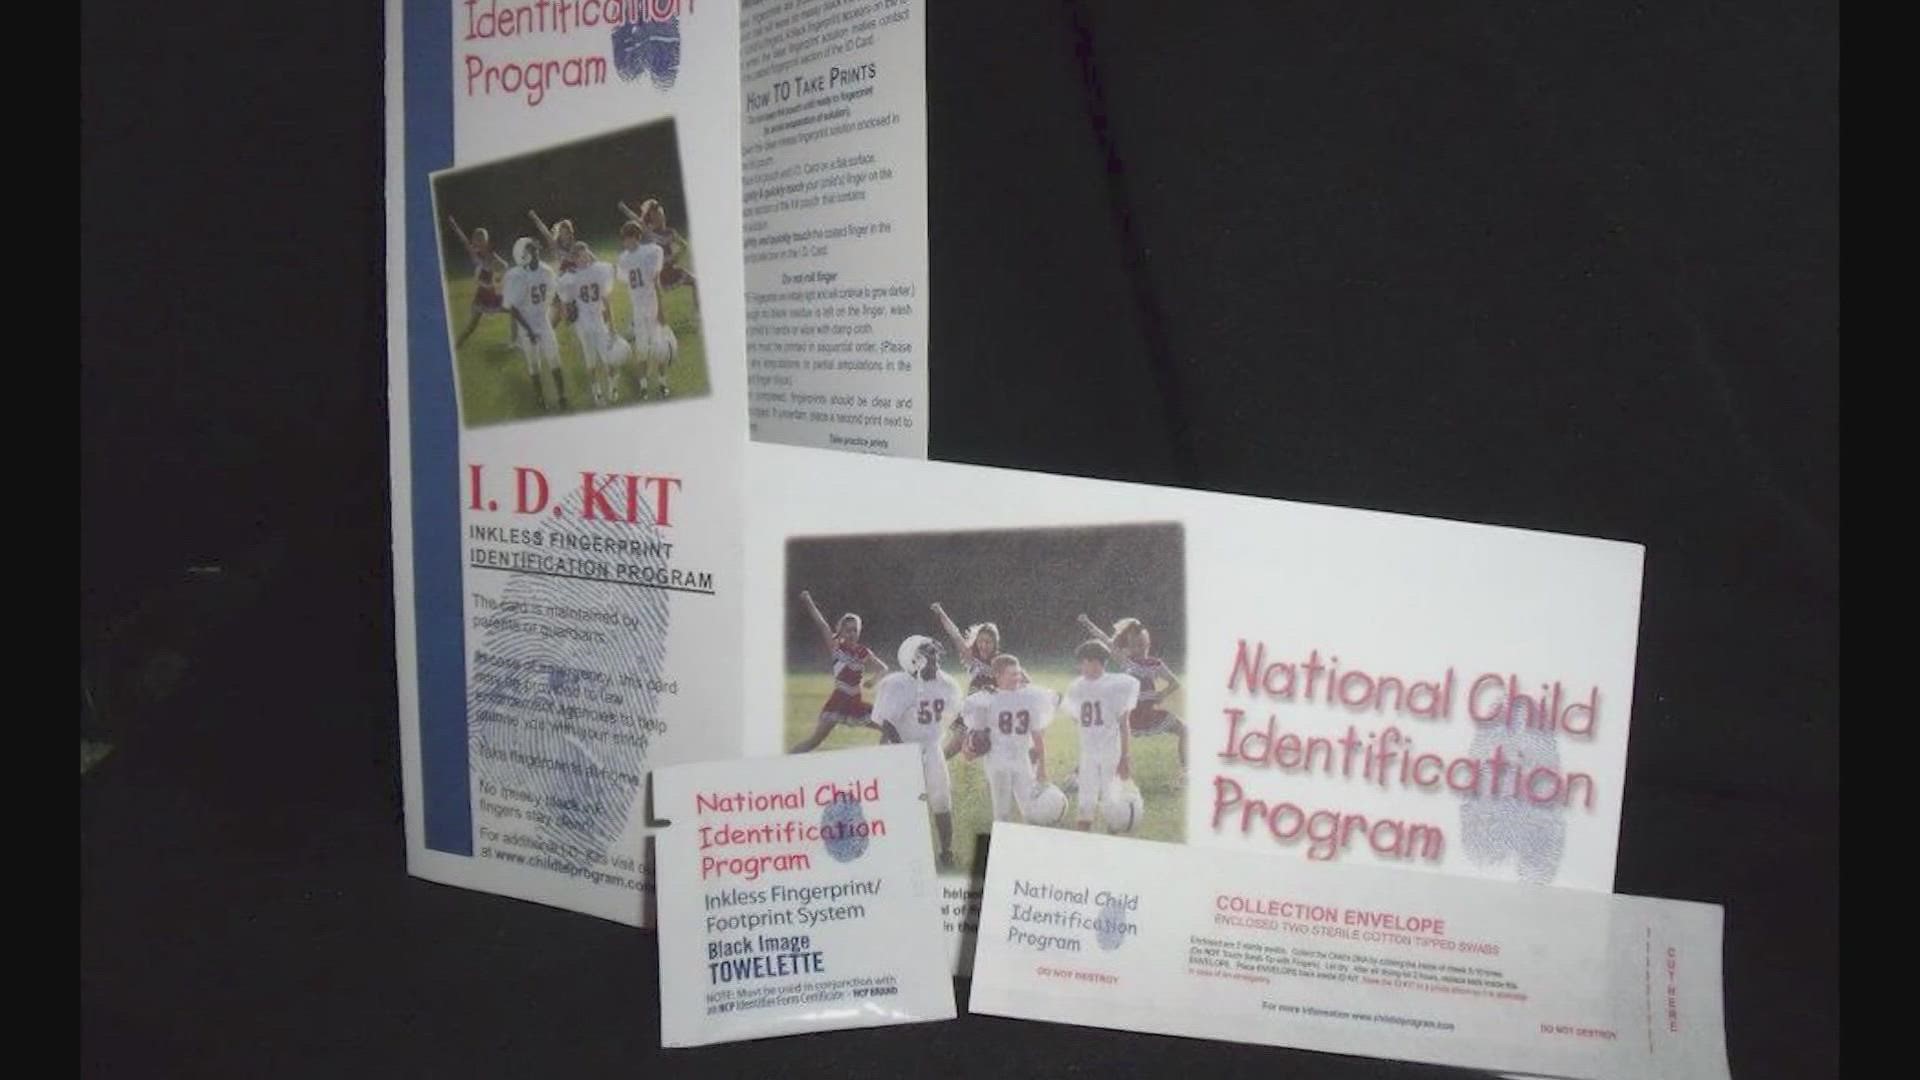 Nearly 4 million of the state-funded ID kits are being distributed to families in public and charter schools.